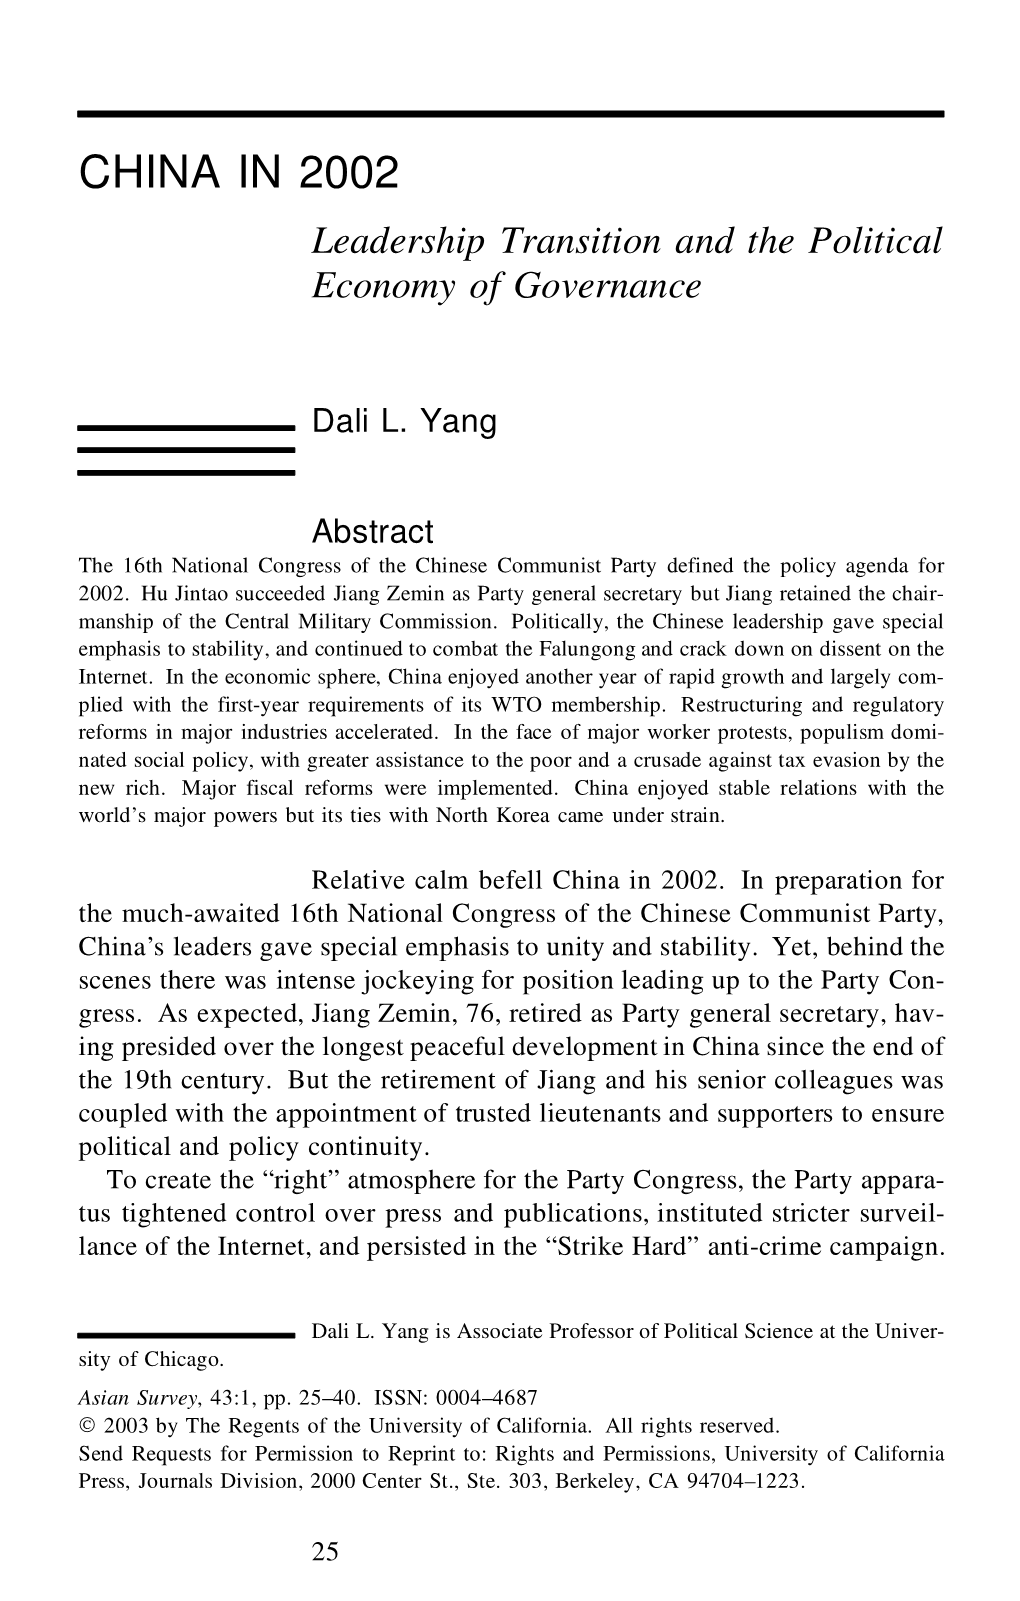 China in 2002: Leadership Transition and the Political Economy Of